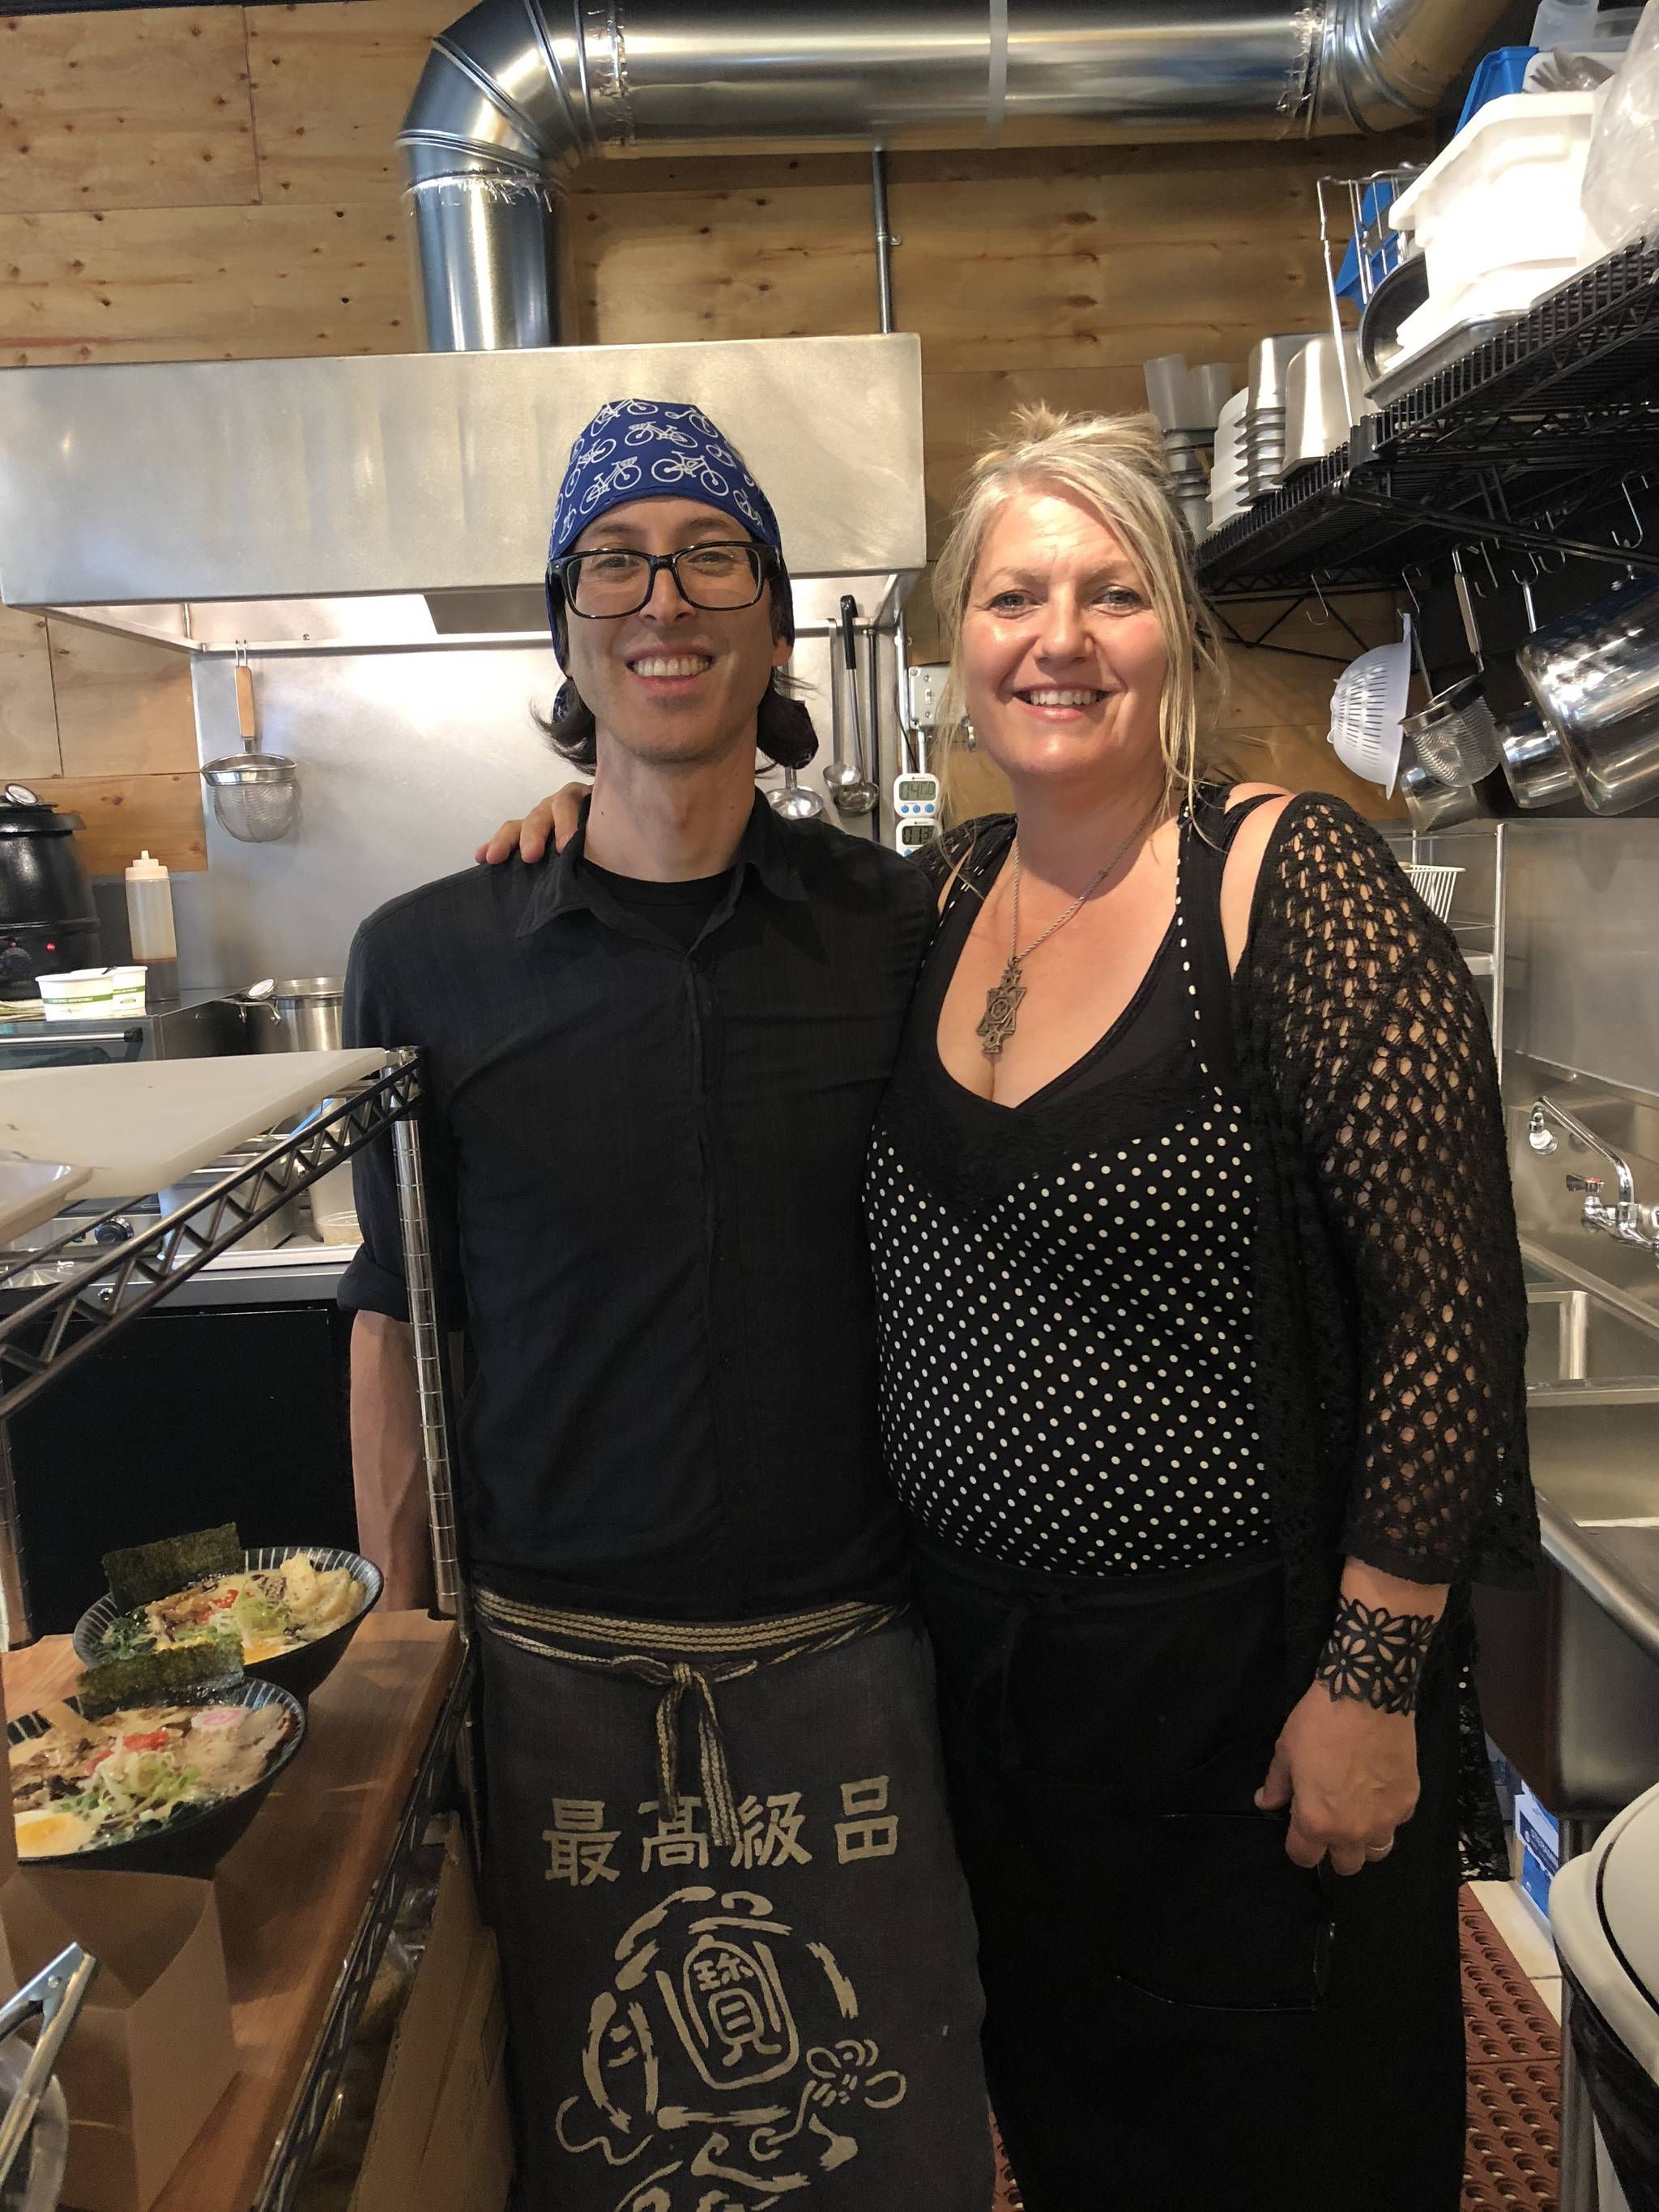 Denis Zimmermann and his wife, Cheryl, run Langley’s new ramen restaurant, Ultra House, which opened in May 2018. Photo by Emily Gilbert/Whidbey News-Times.